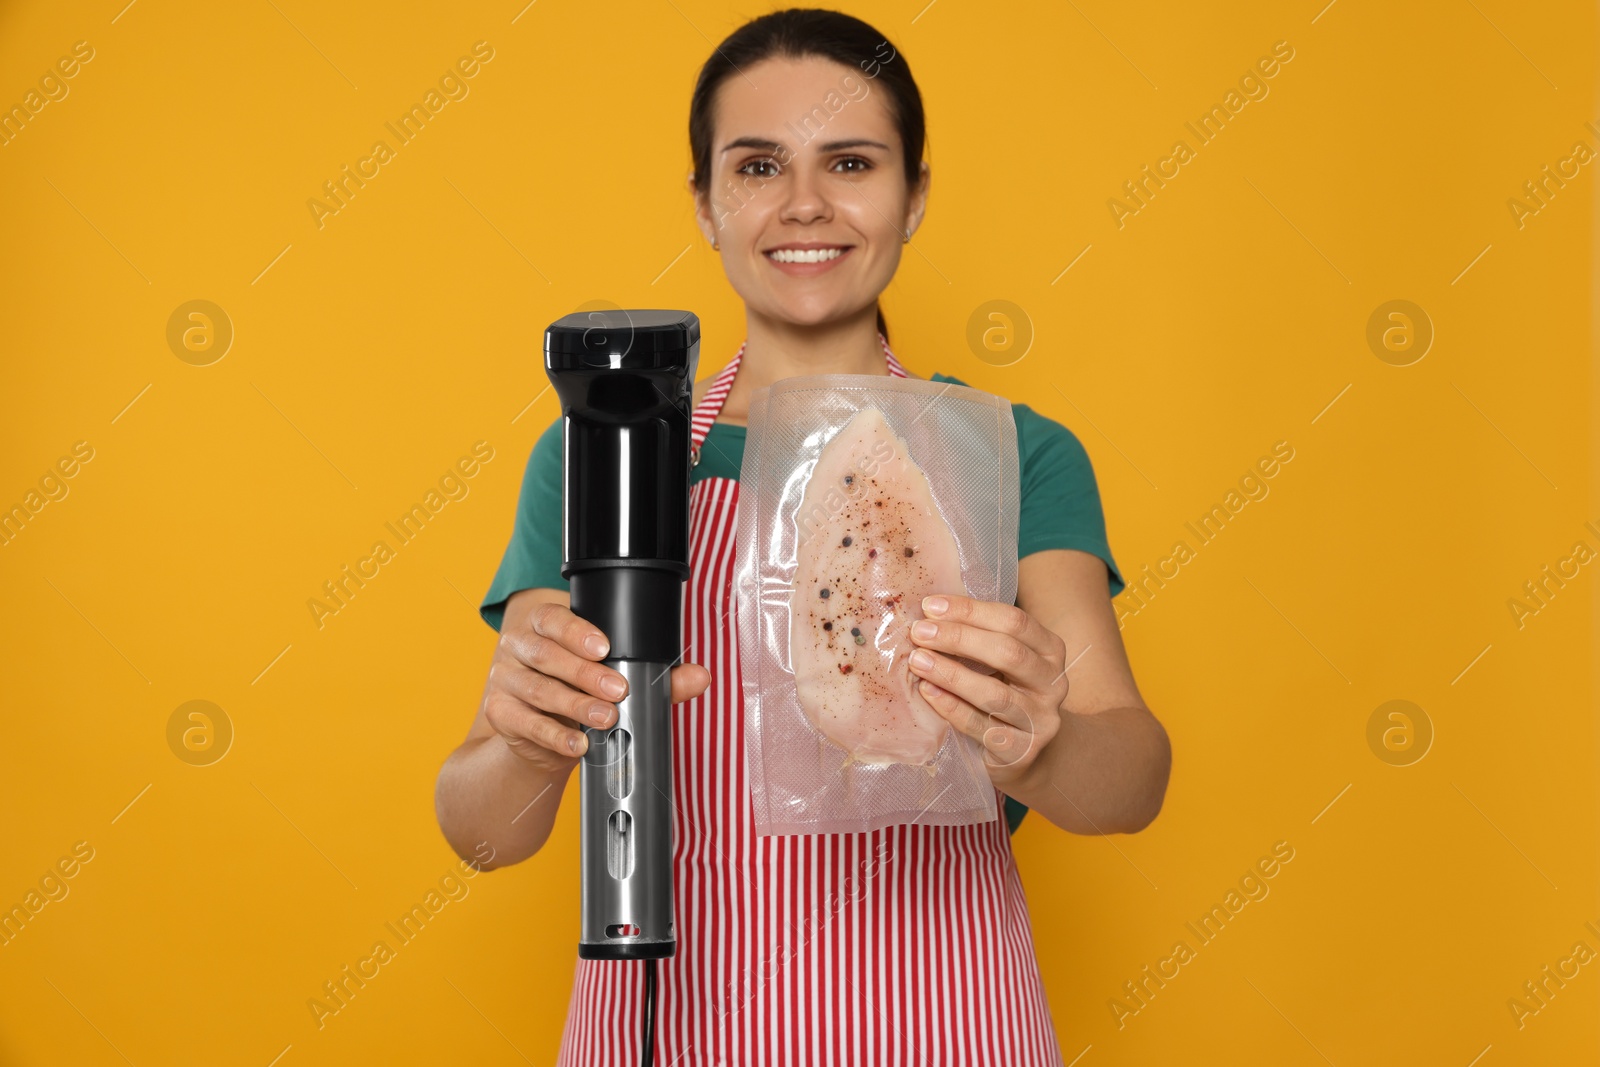 Photo of Beautiful young woman holding sous vide cooker and meat in vacuum pack against orange background, focus on hands